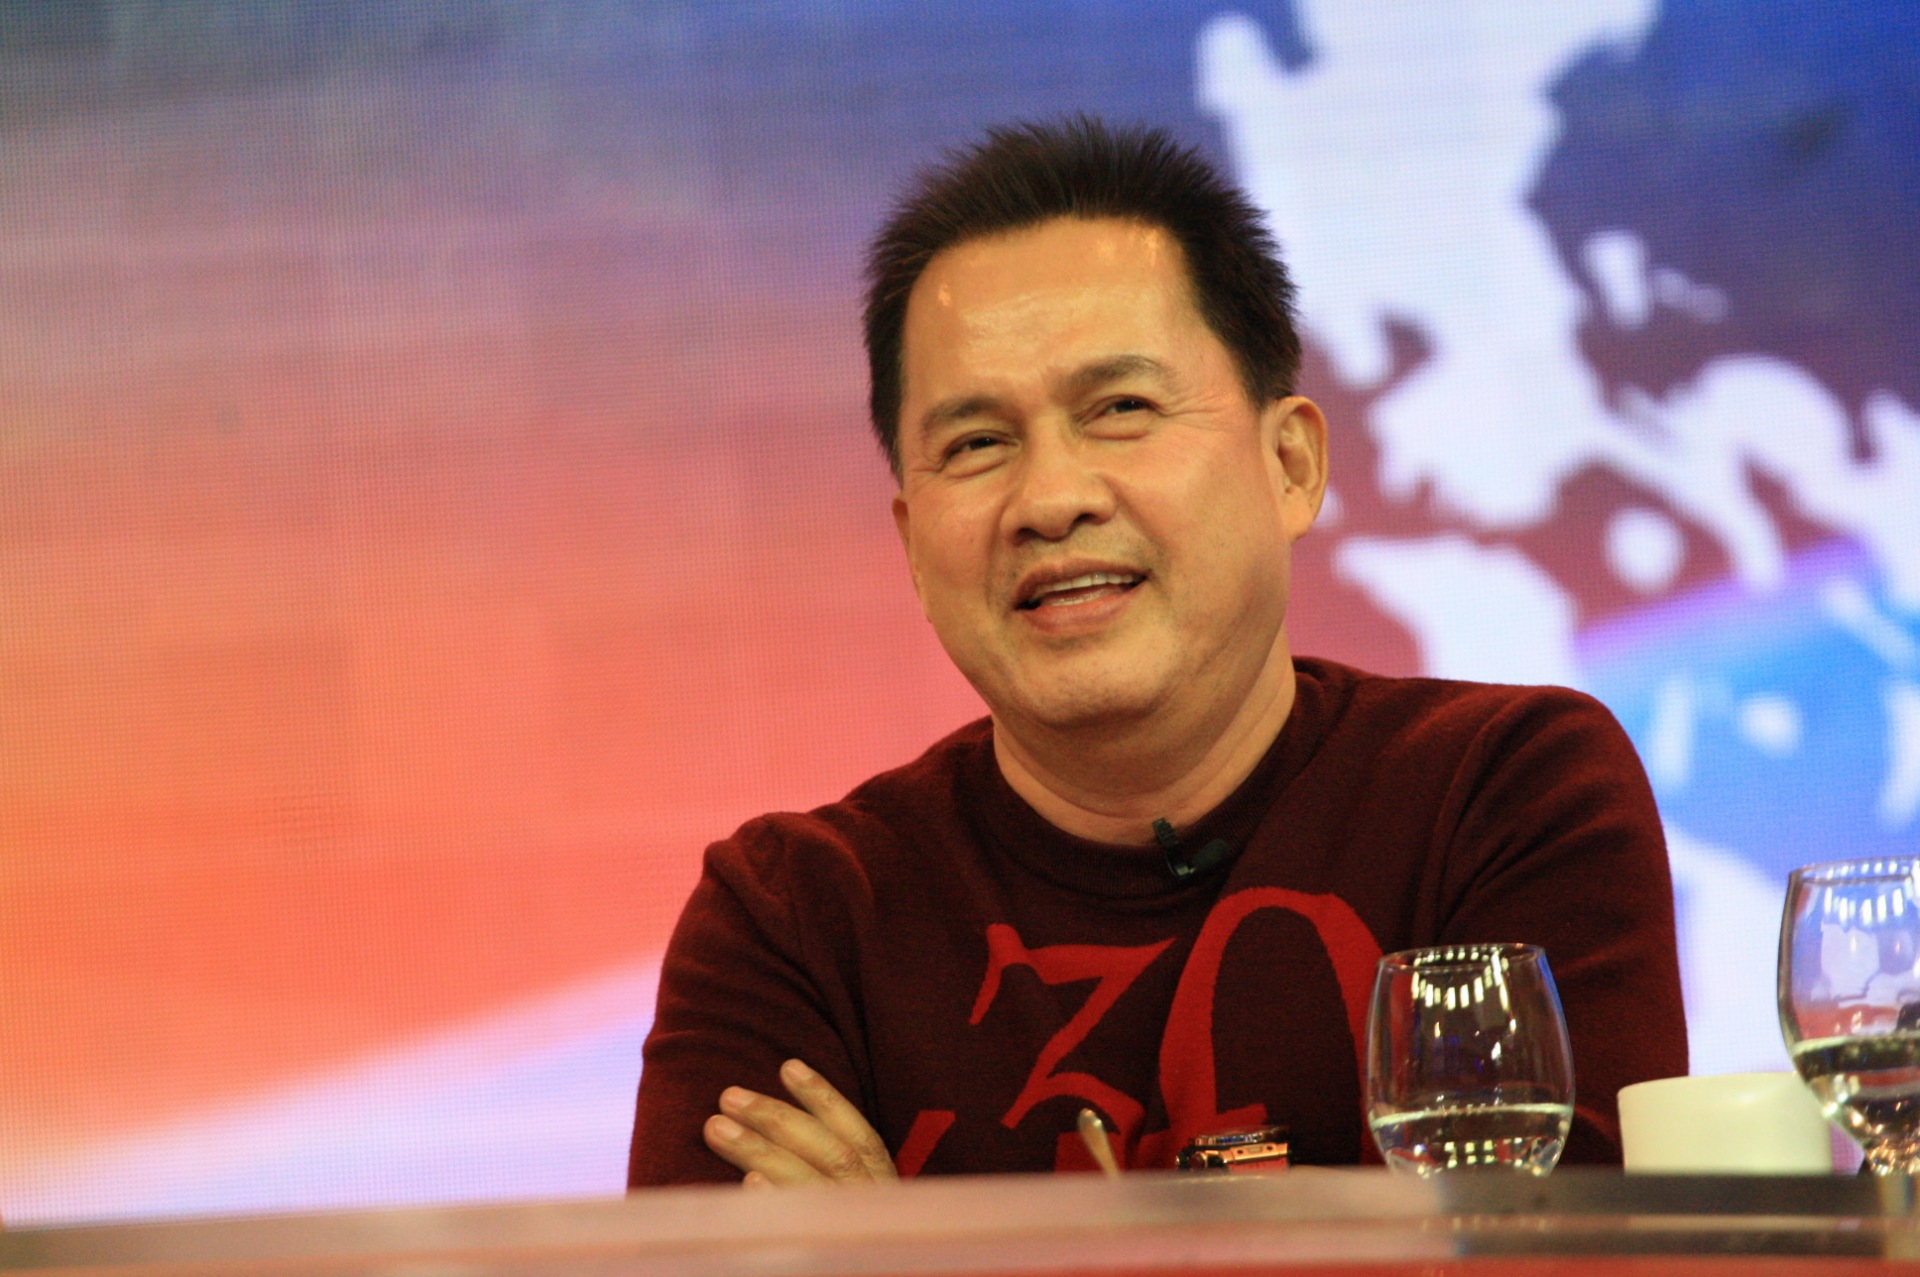 PASTOR QUIBOLOY. Kingdom of Jesus Christ founder Apollo Quiboloy refers to himself as the 'Appointed Son of God'. File photo by Manman Dejeto/Rappler 